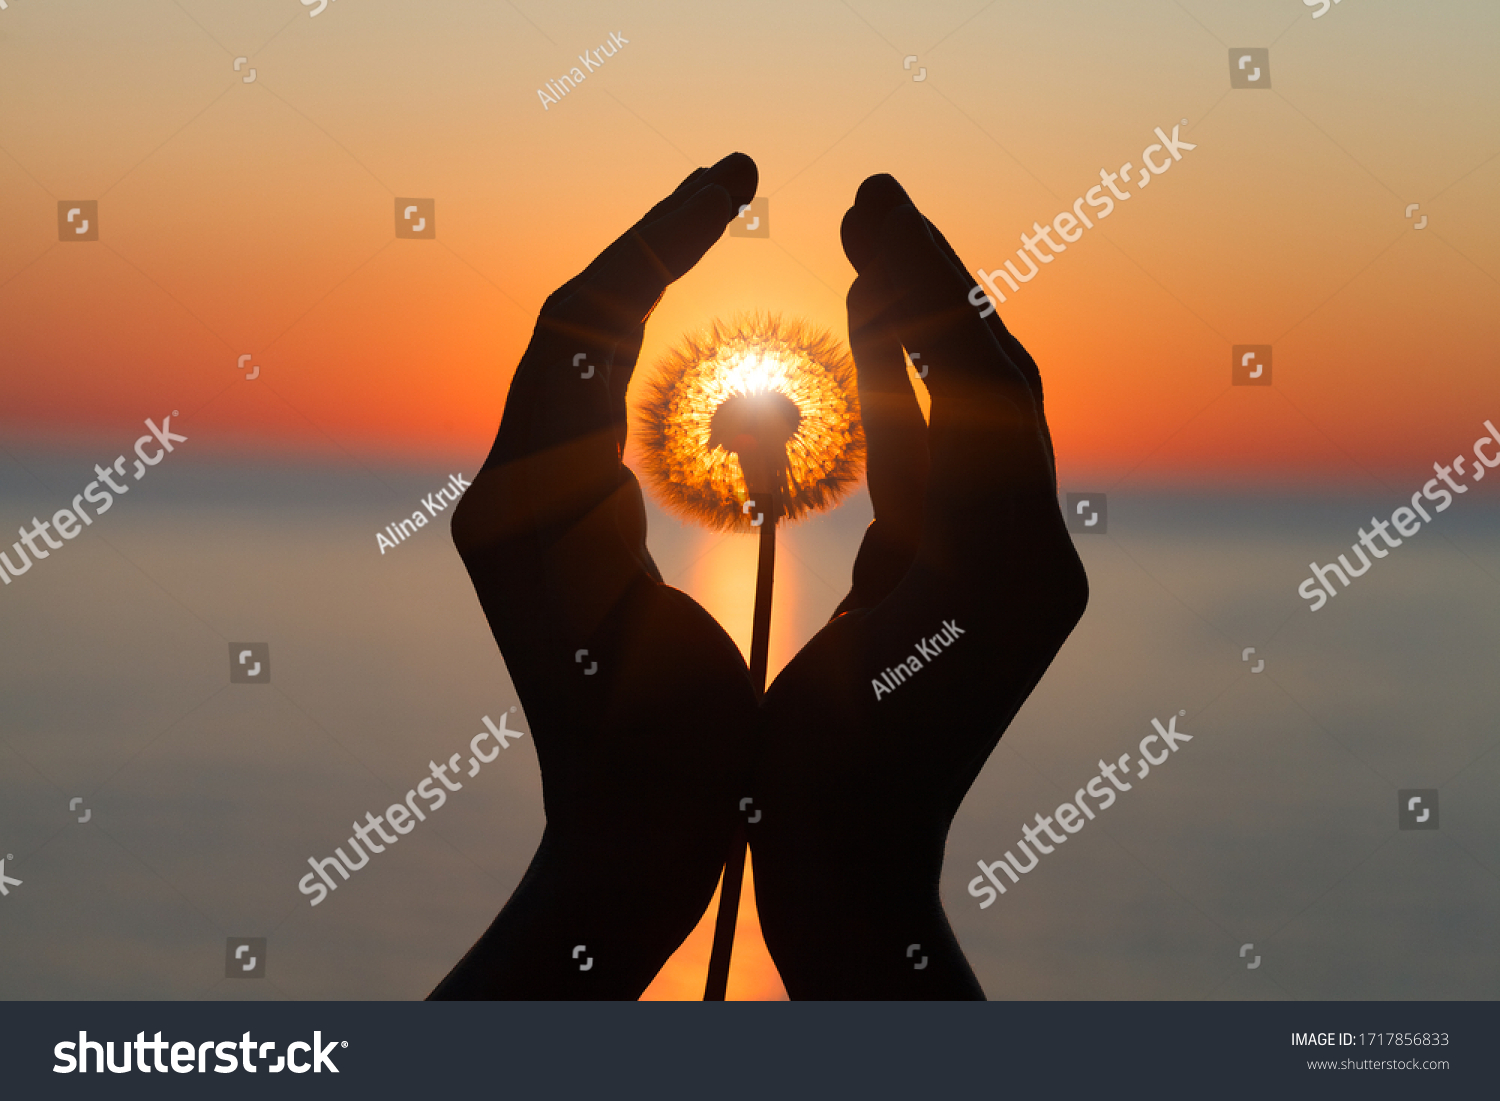 dandelion flower in young woman's hands at sunset or sunrise light, sea water landscape, spiritual, meditation, soul, harmony concept #1717856833